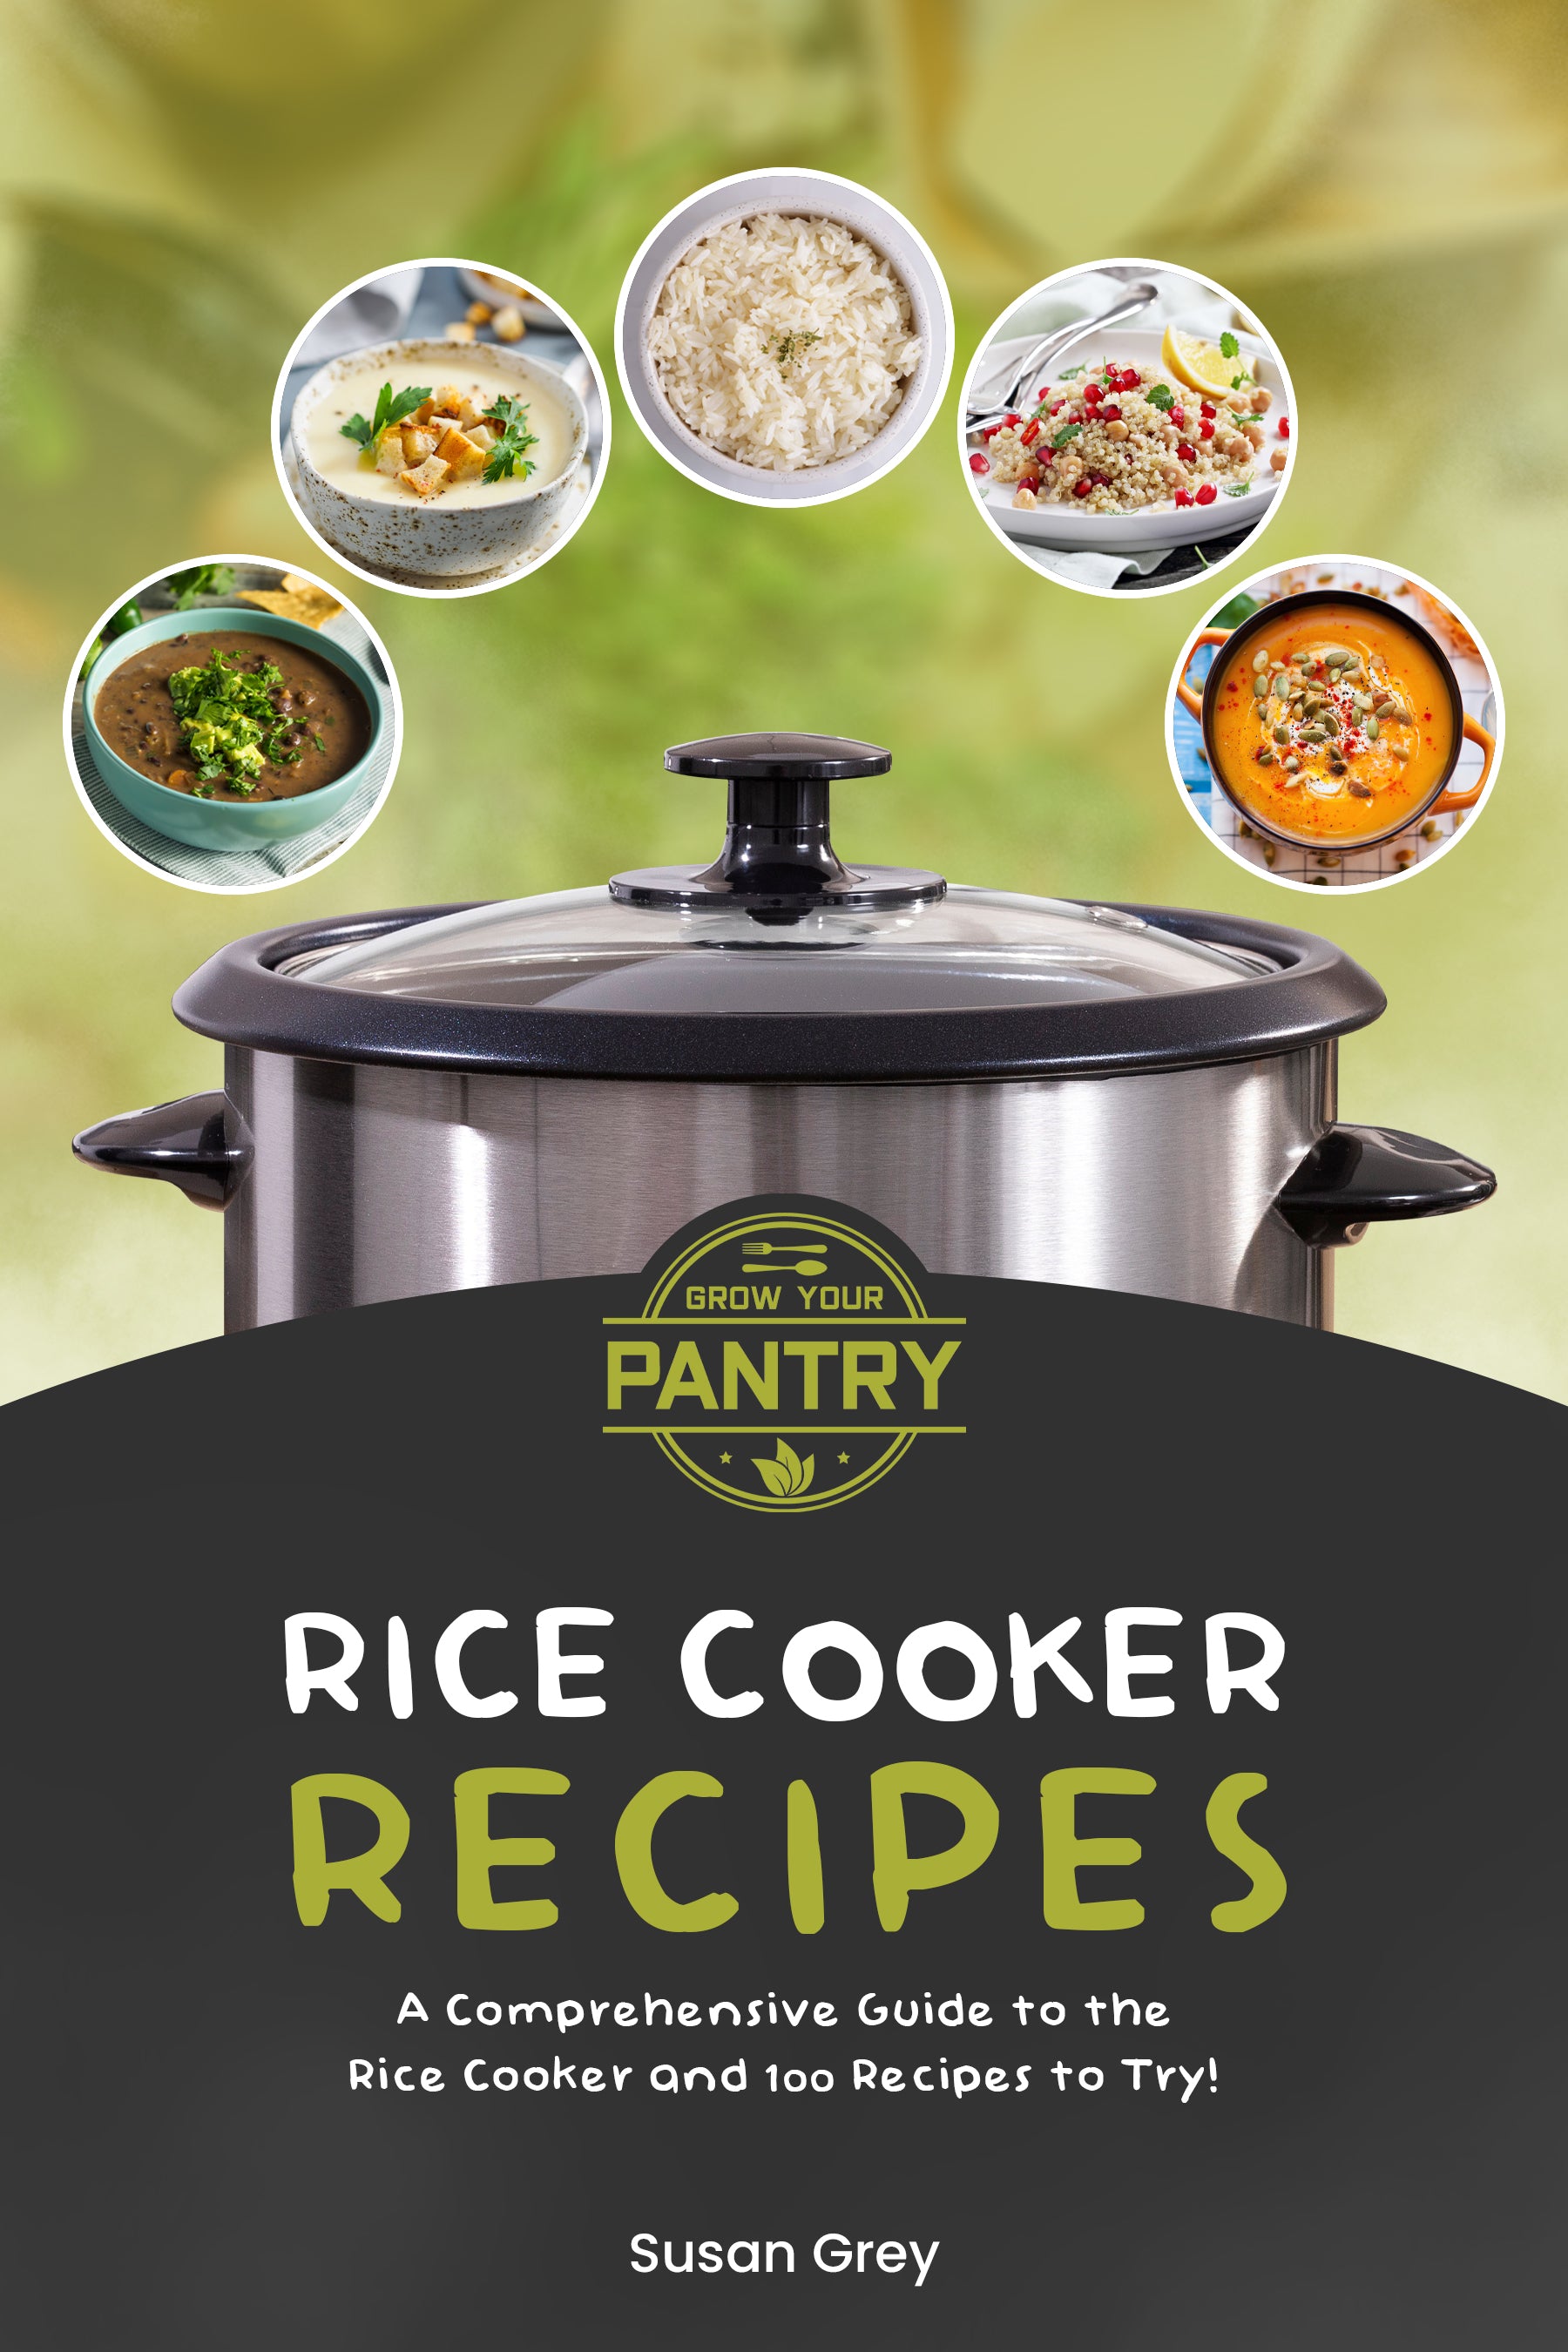 A Guide to Rice Cookers